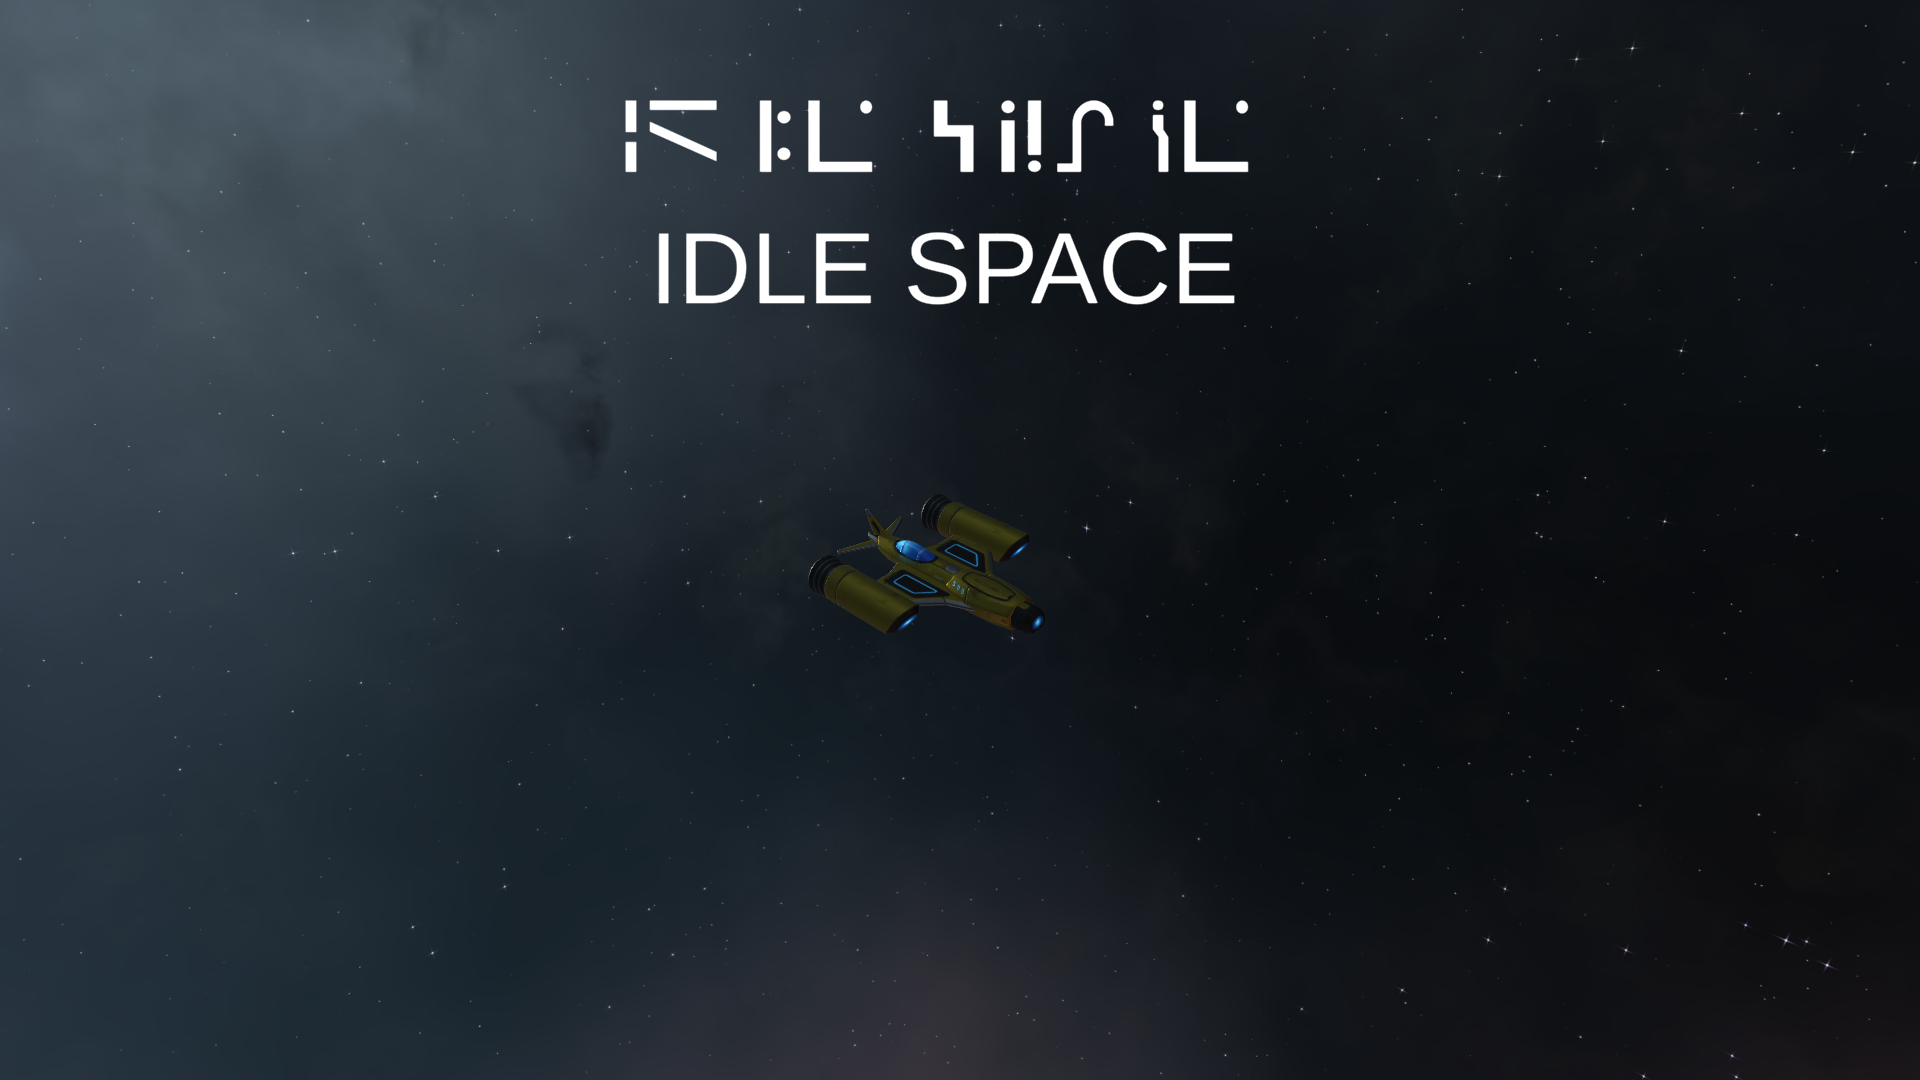 IDLE SPACE